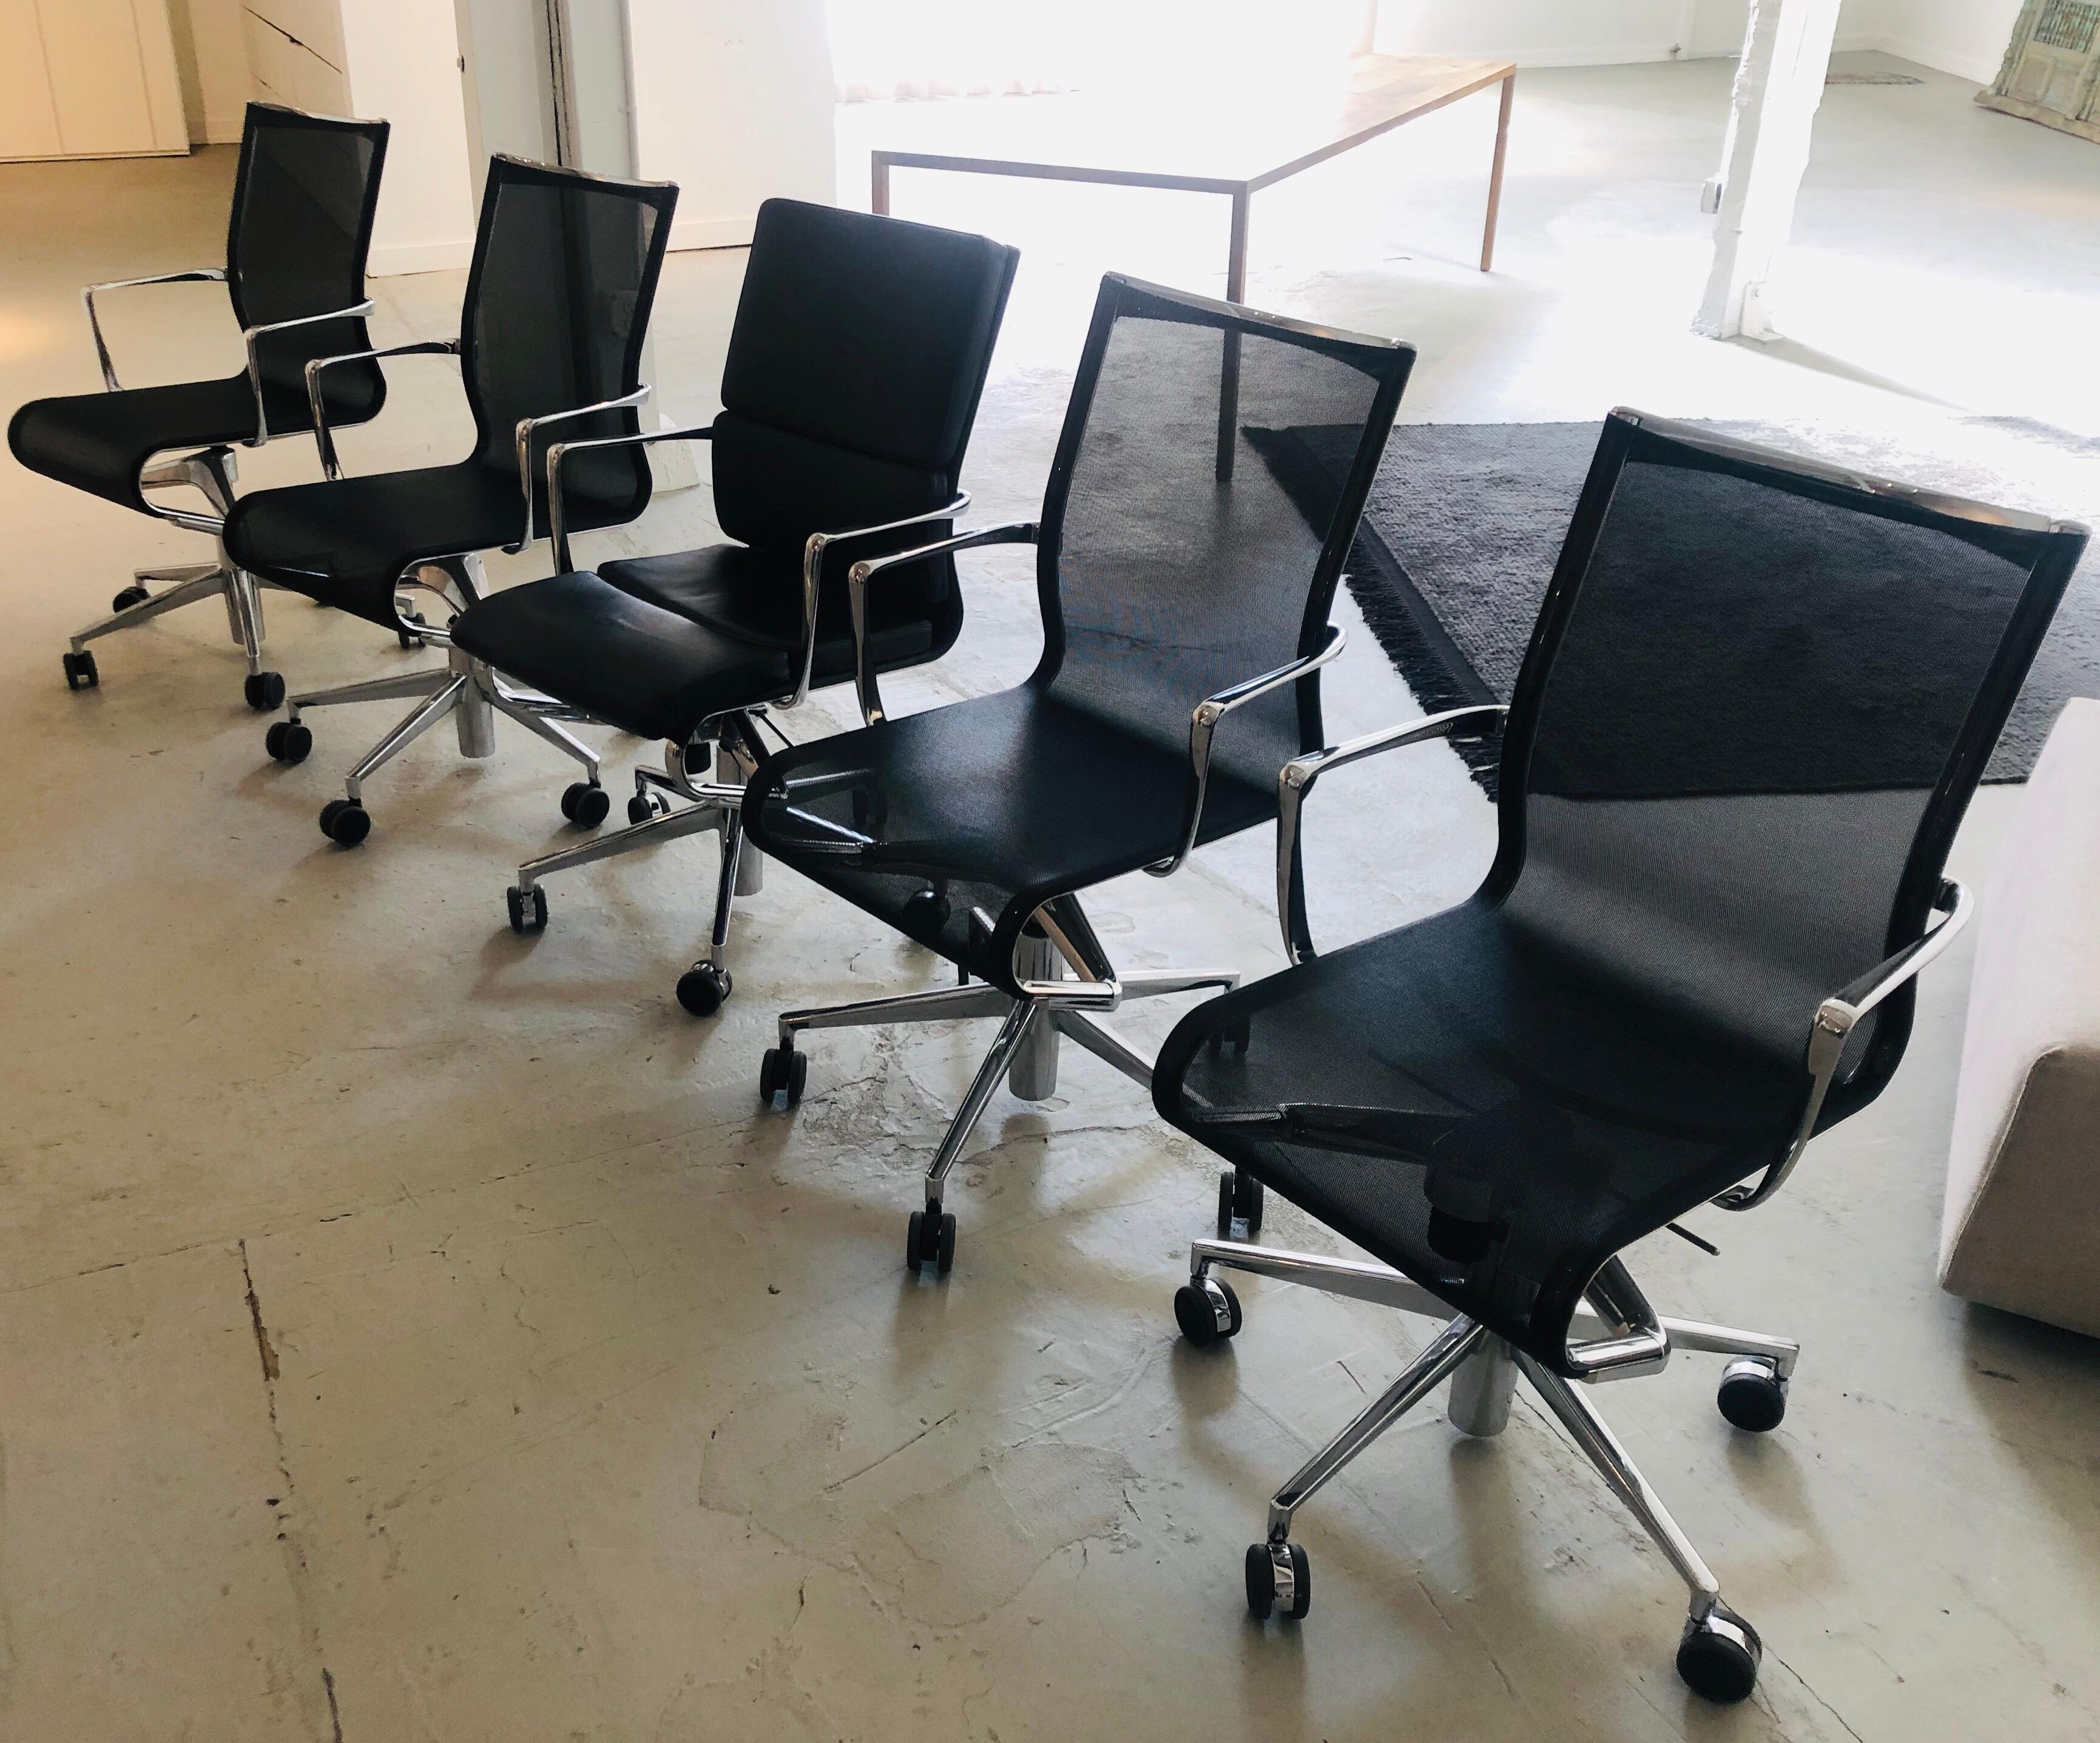 The 434 Rollingframe swivel chair with armrests was designed by Alberto Meda for the Italian manufacturer Alias. 

• Height-adjustable swivel chair with armrests
• 5-star base with soft wheels
• Frame made of extruded aluminum and die-cast